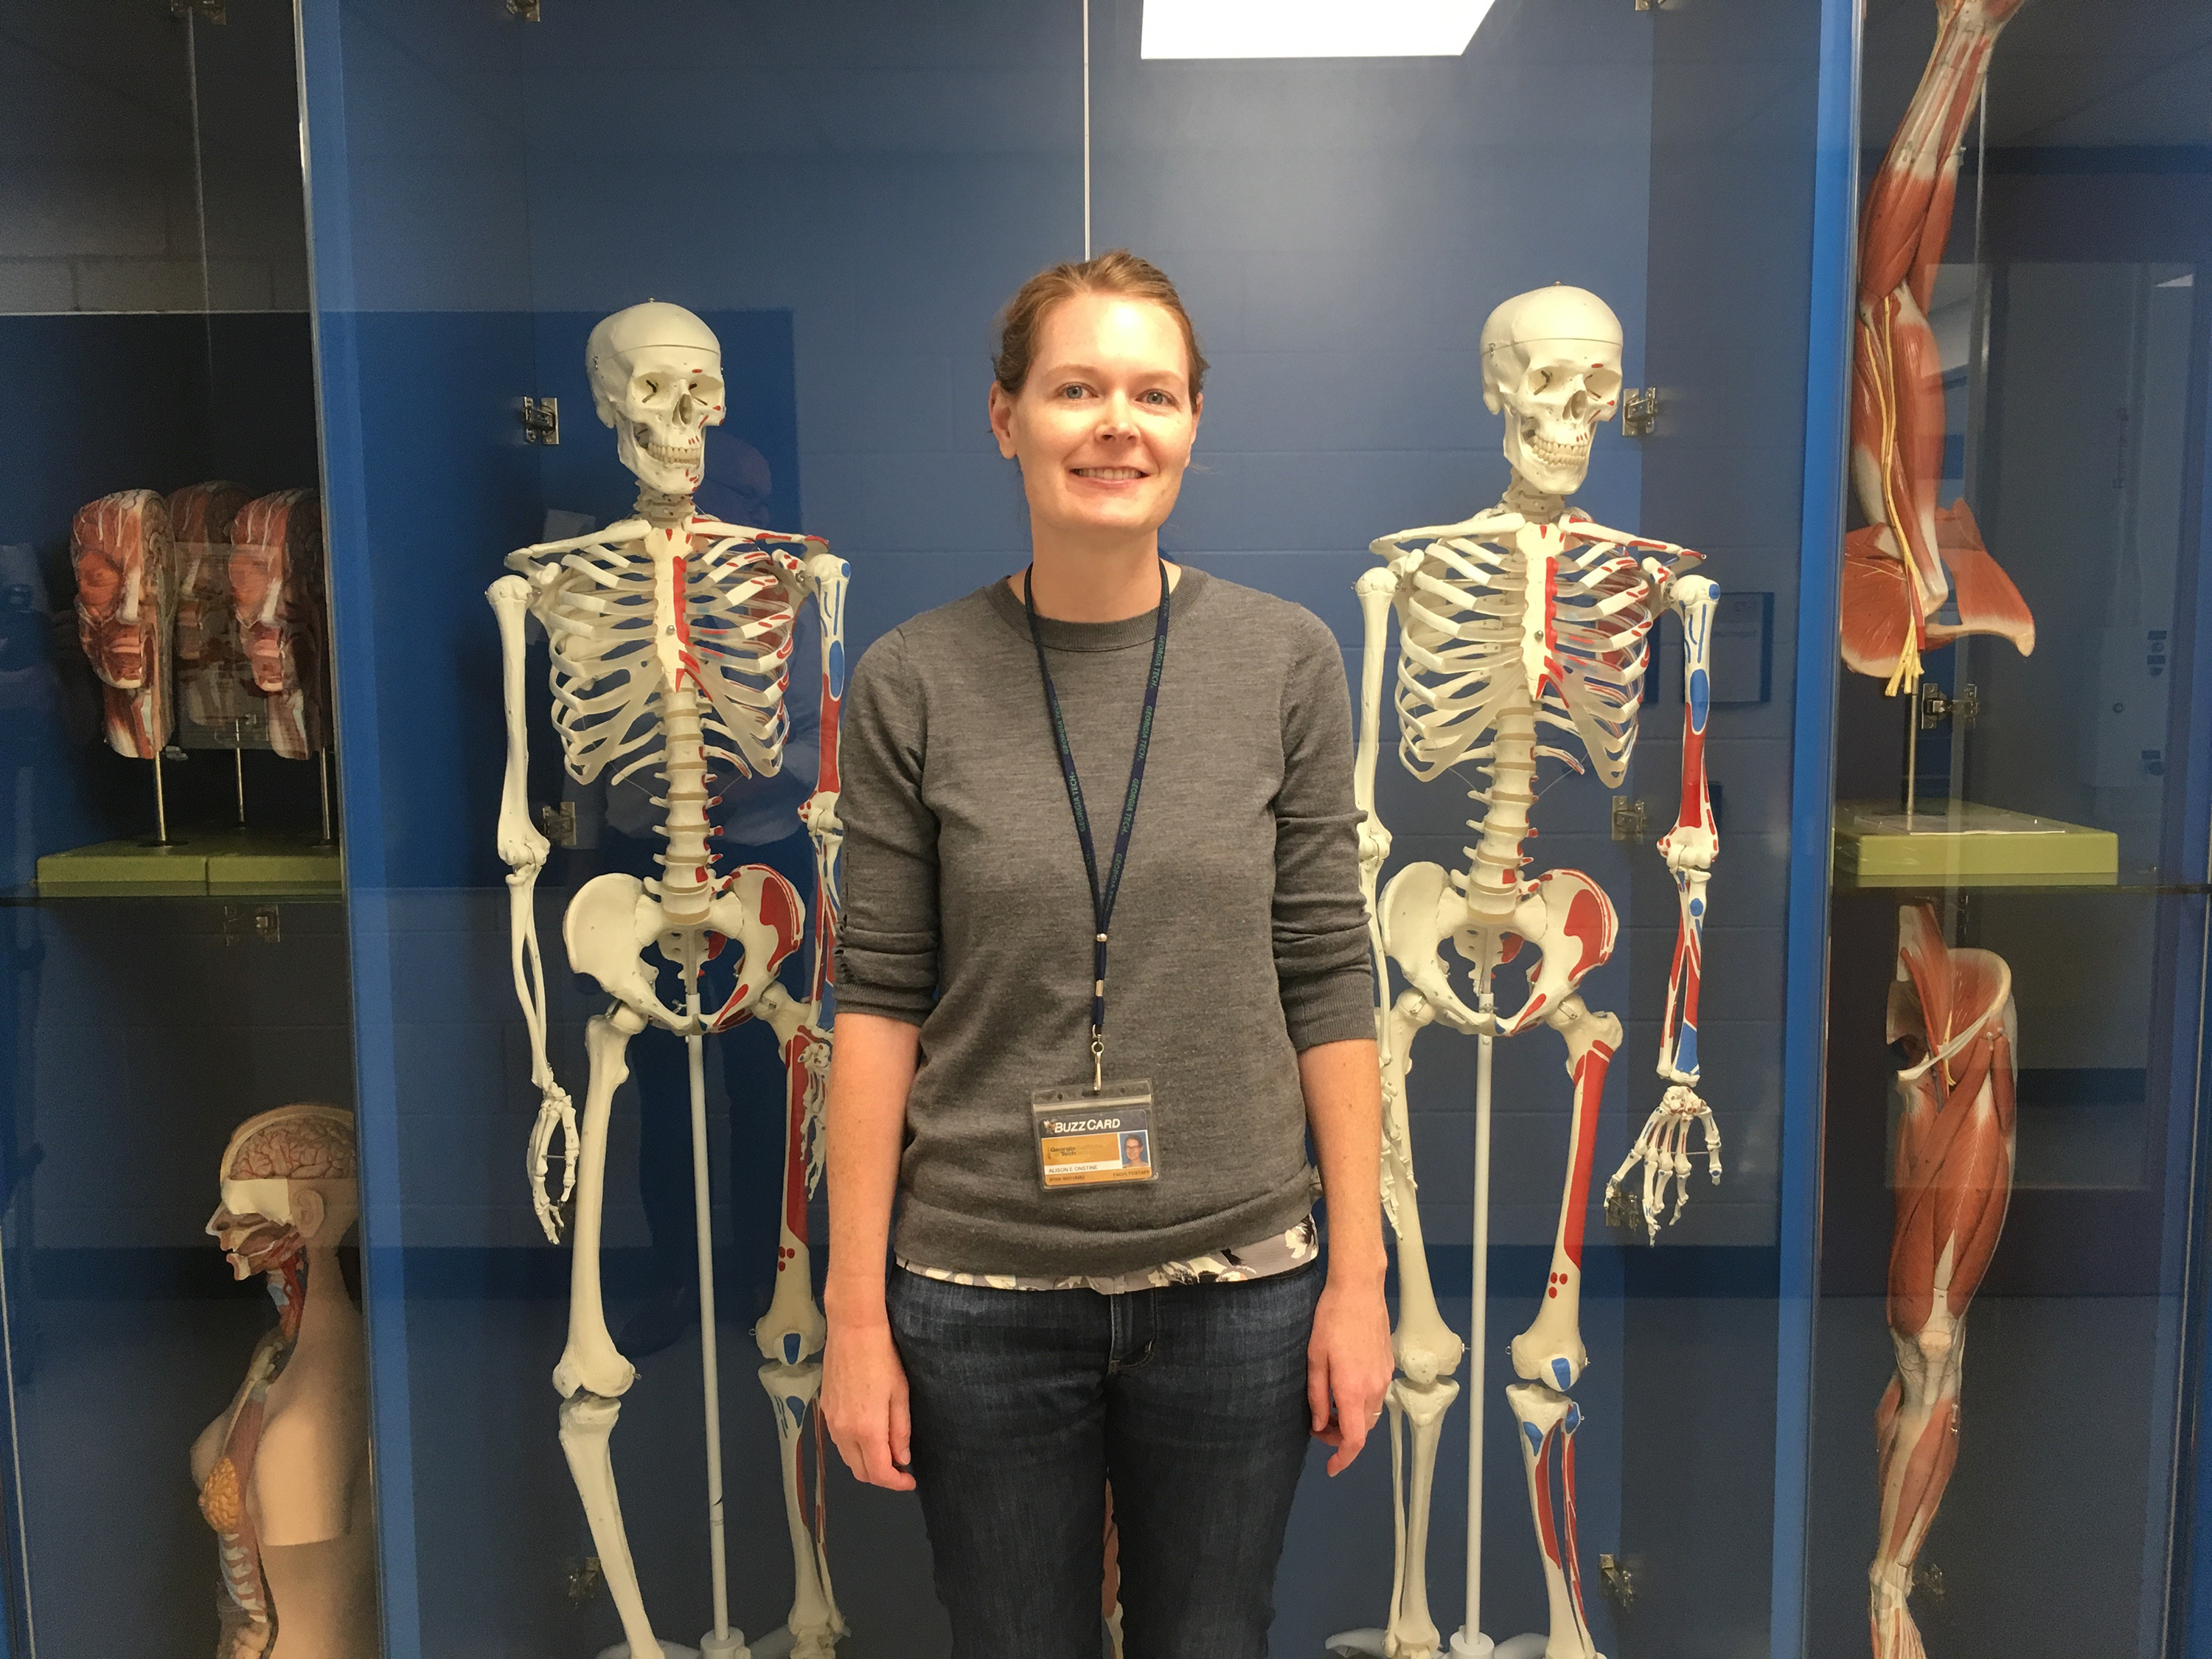 Alison Onstine by the anatomy display case in Boggs (Photo by Maureen Rouhi)